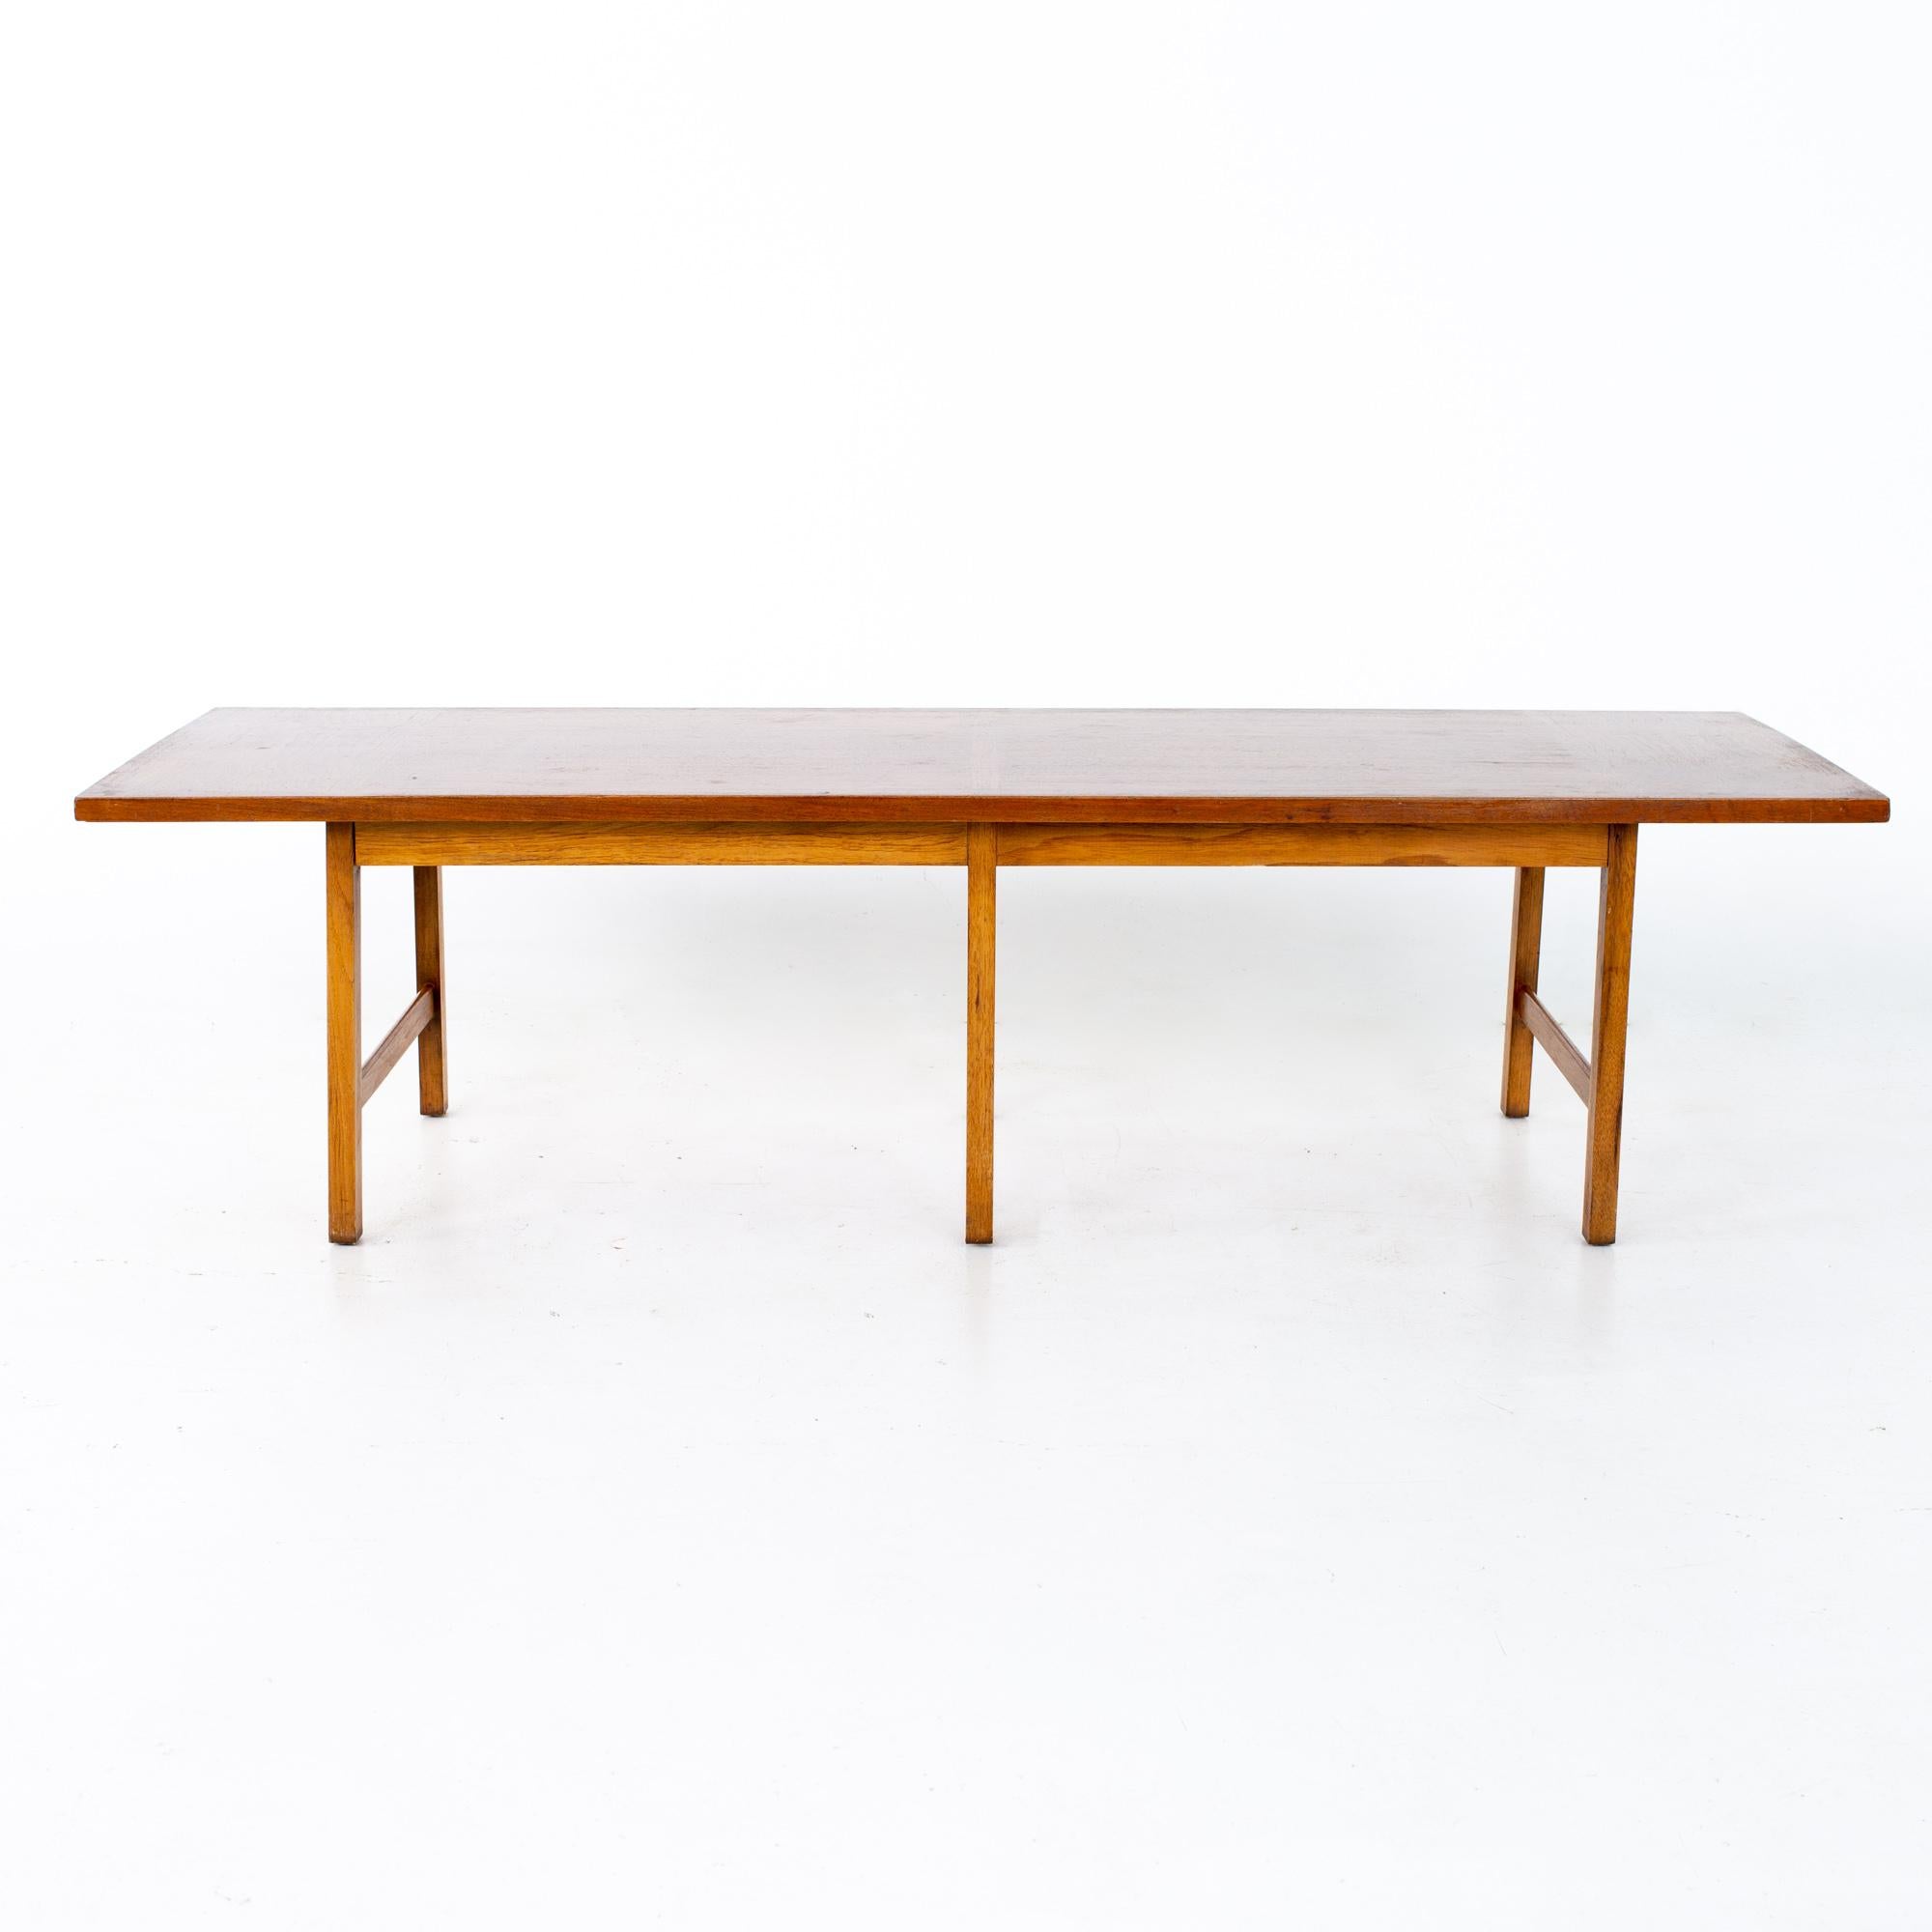 Paul McCobb for Lane Delineator Mid Century Walnut Coffee Table
Coffee table measures: 56 wide x 19 deep x 15 inches high

All pieces of furniture can be had in what we call restored vintage condition. That means the piece is restored upon